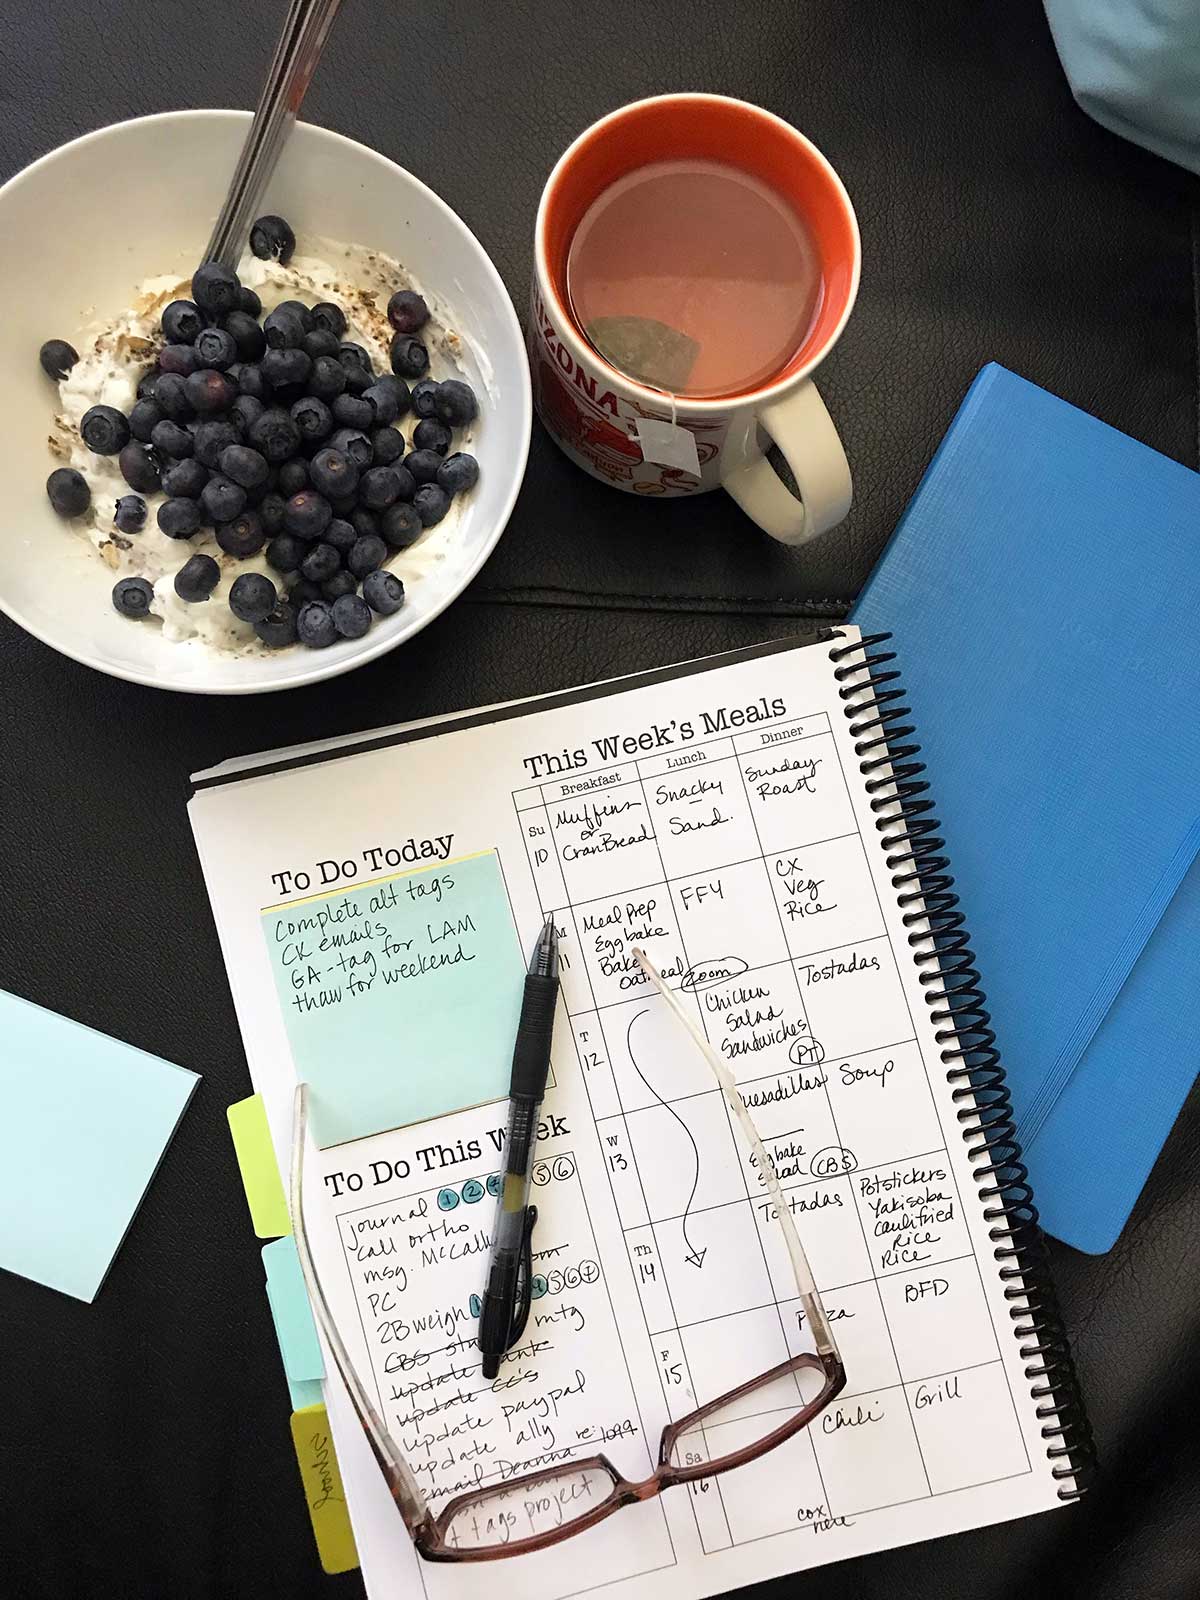 meal plan written in planner with mug and bowl